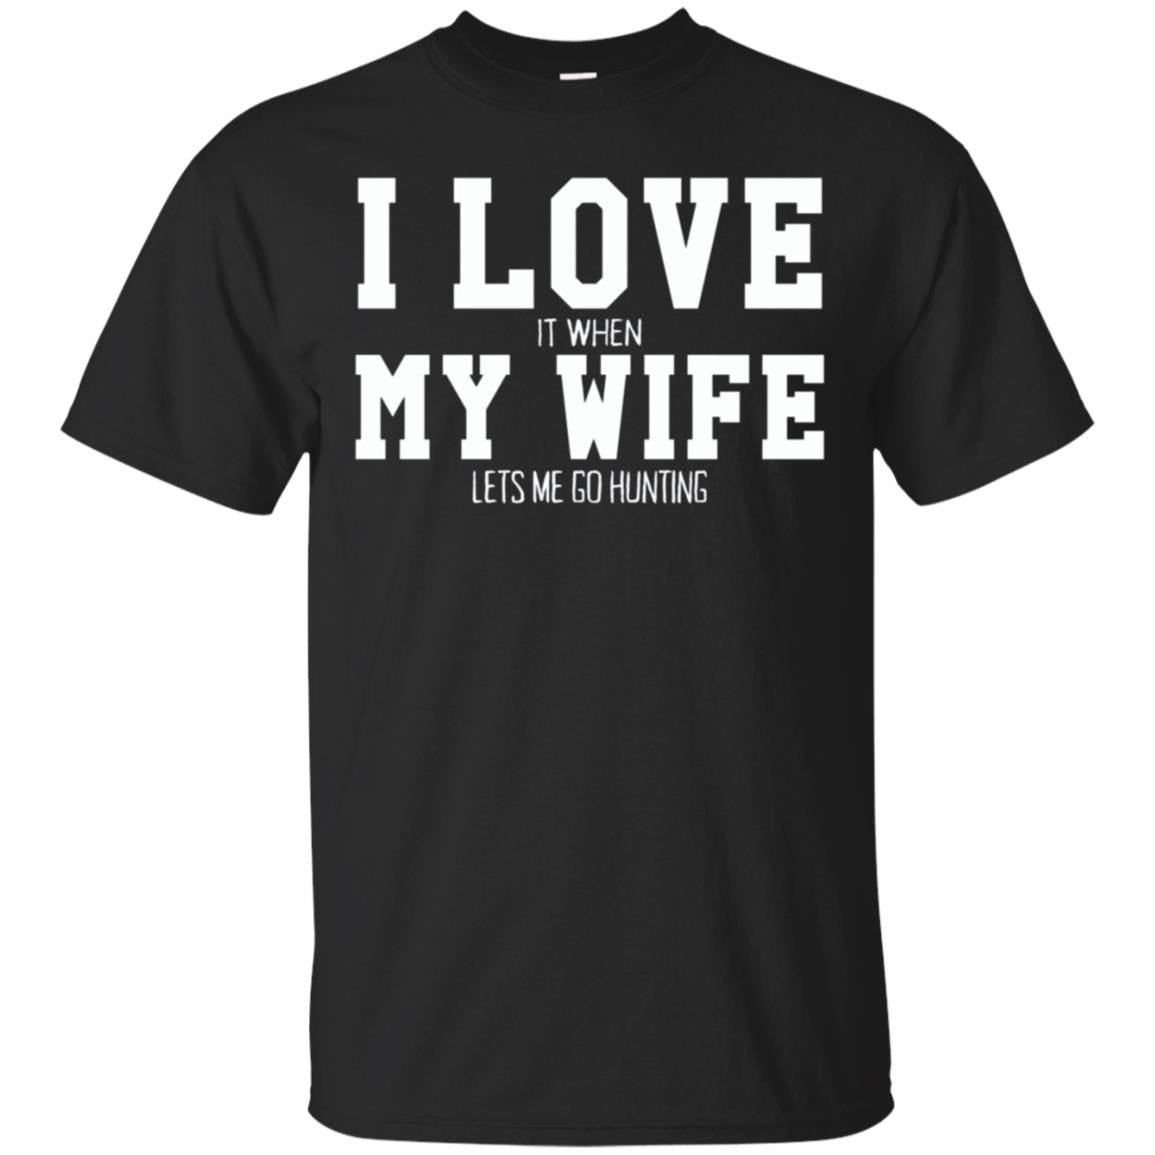 Love My Wife And Hunting T Shirt